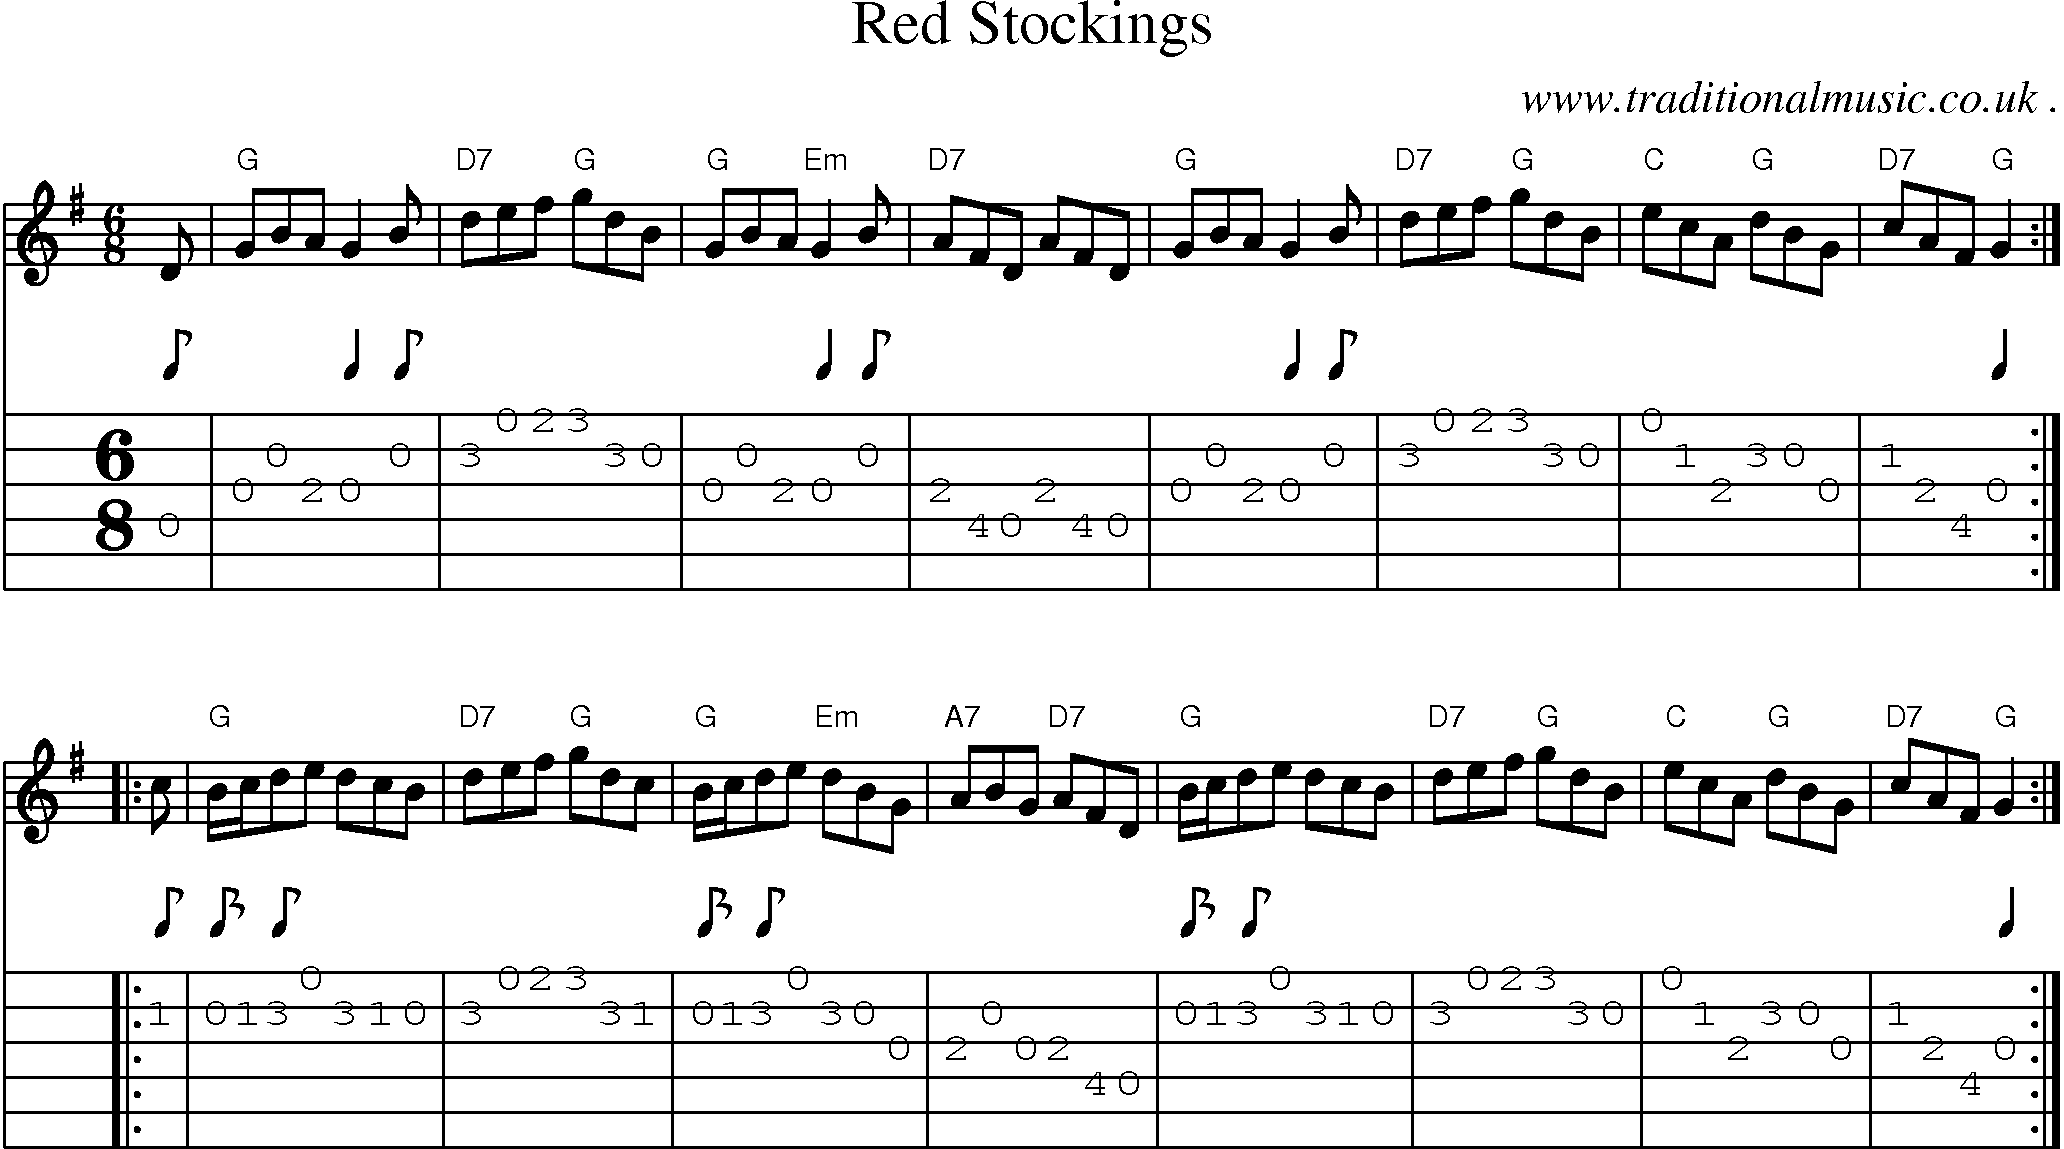 Sheet-music  score, Chords and Guitar Tabs for Red Stockings